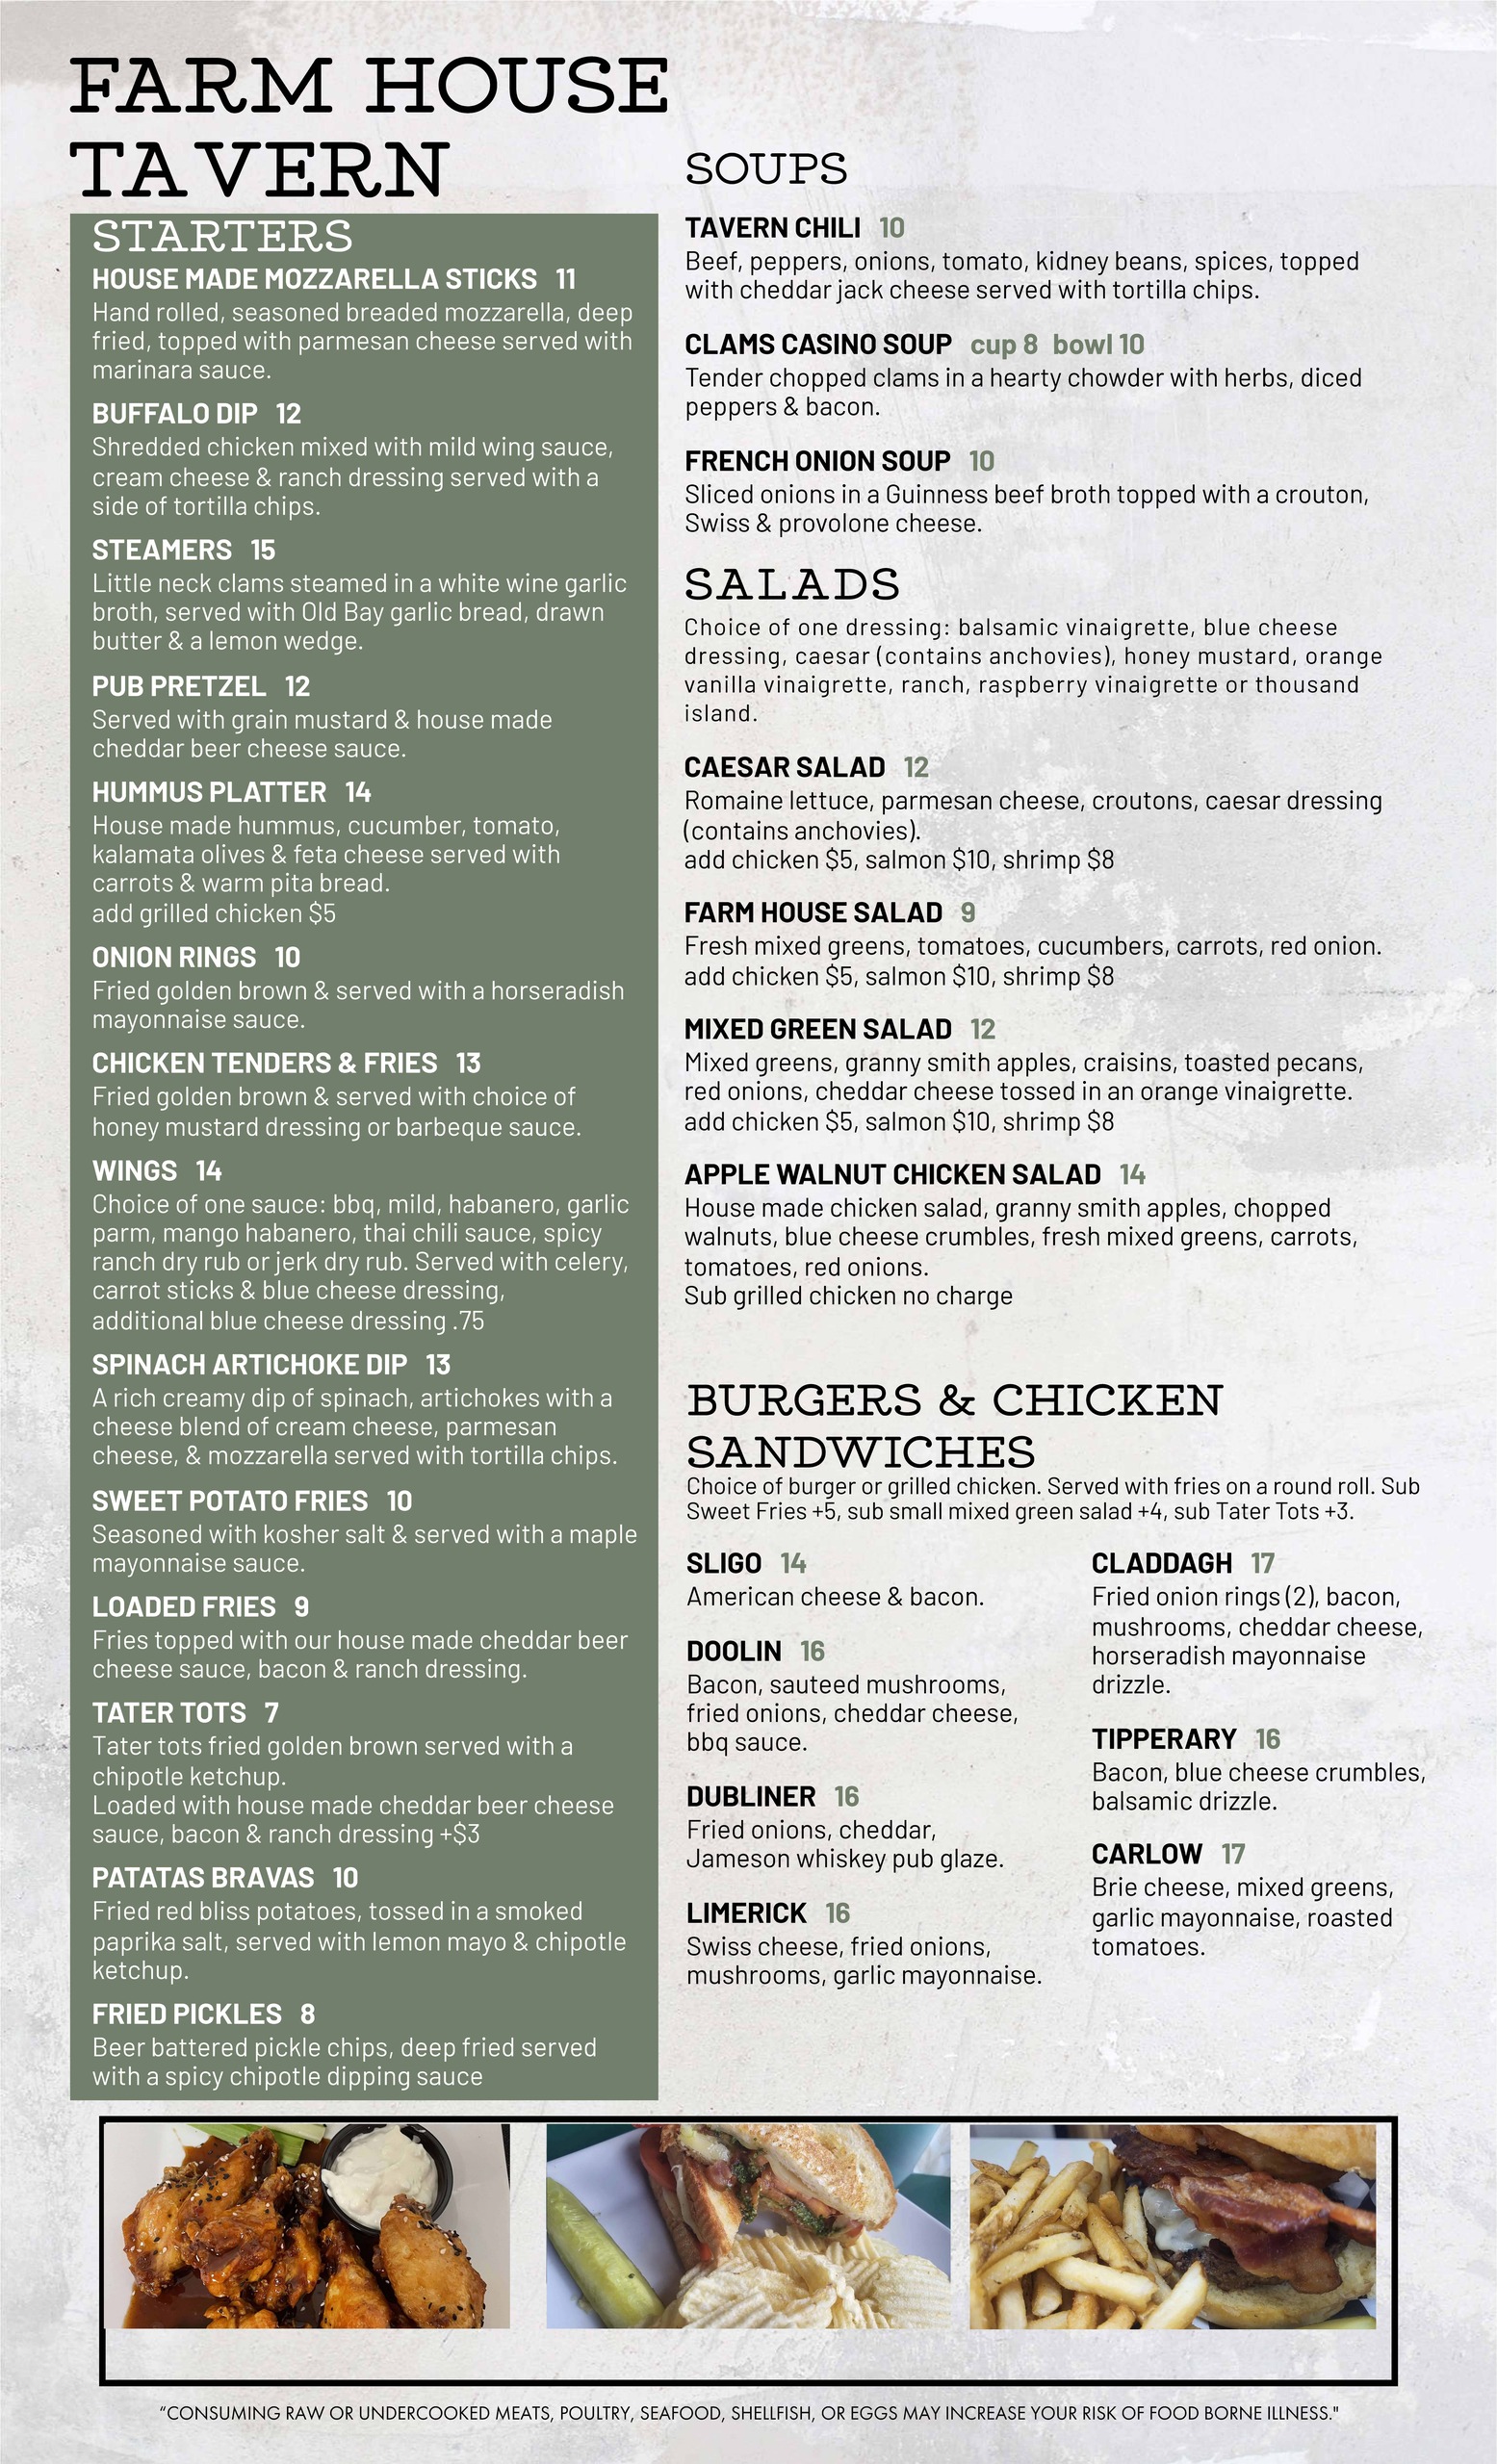 A restaurant menu titled "Farm House Tavern" featuring sections for starters, soups, salads, burgers, sandwiches, and chicken dishes. Each dish includes a description and price.